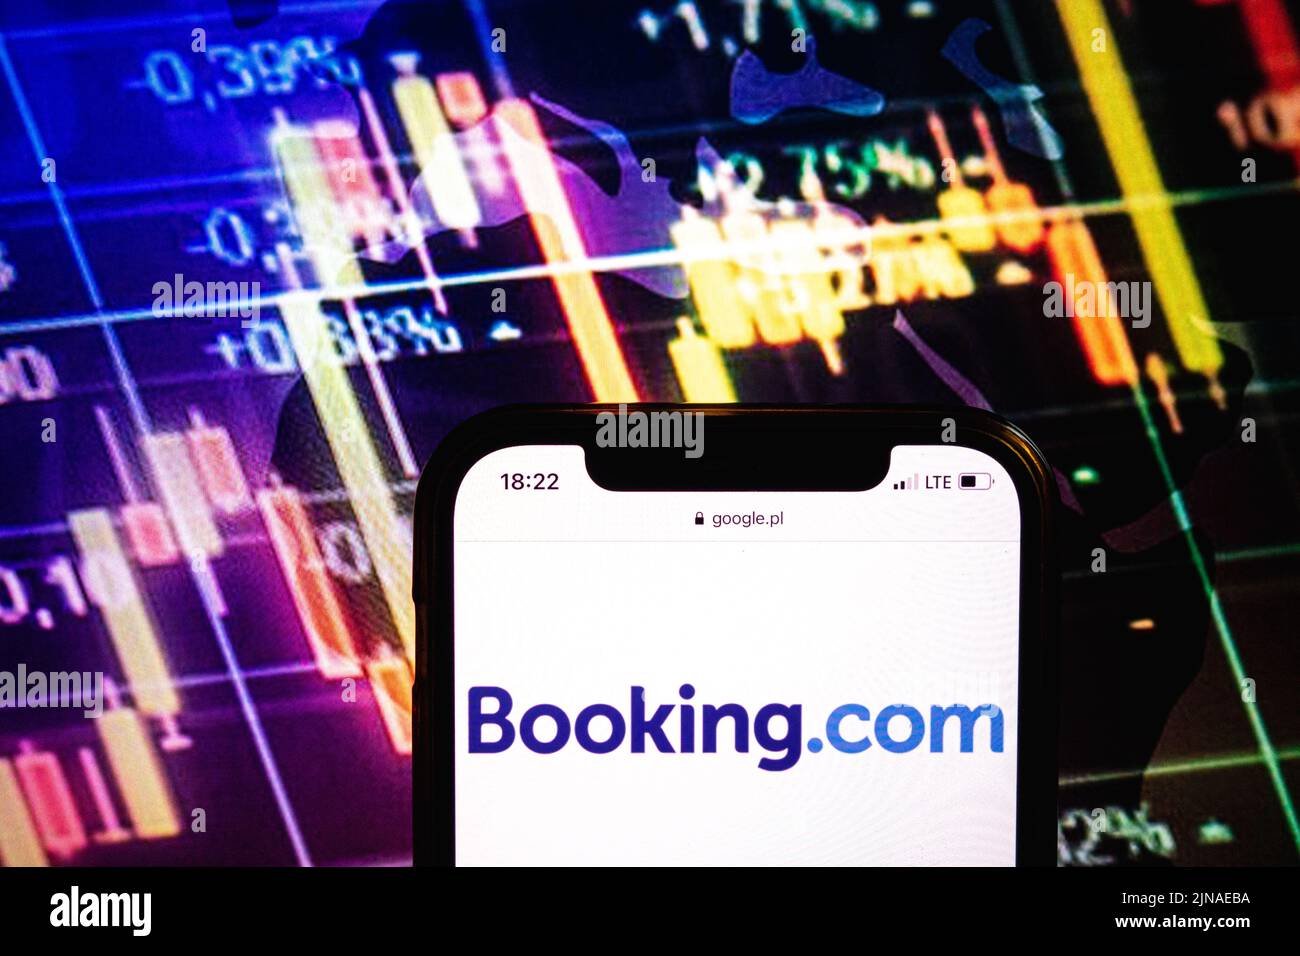 KONSKIE, POLAND - August 09, 2022: Smartphone displaying logo of Booking.com company on stock exchange diagram background Stock Photo